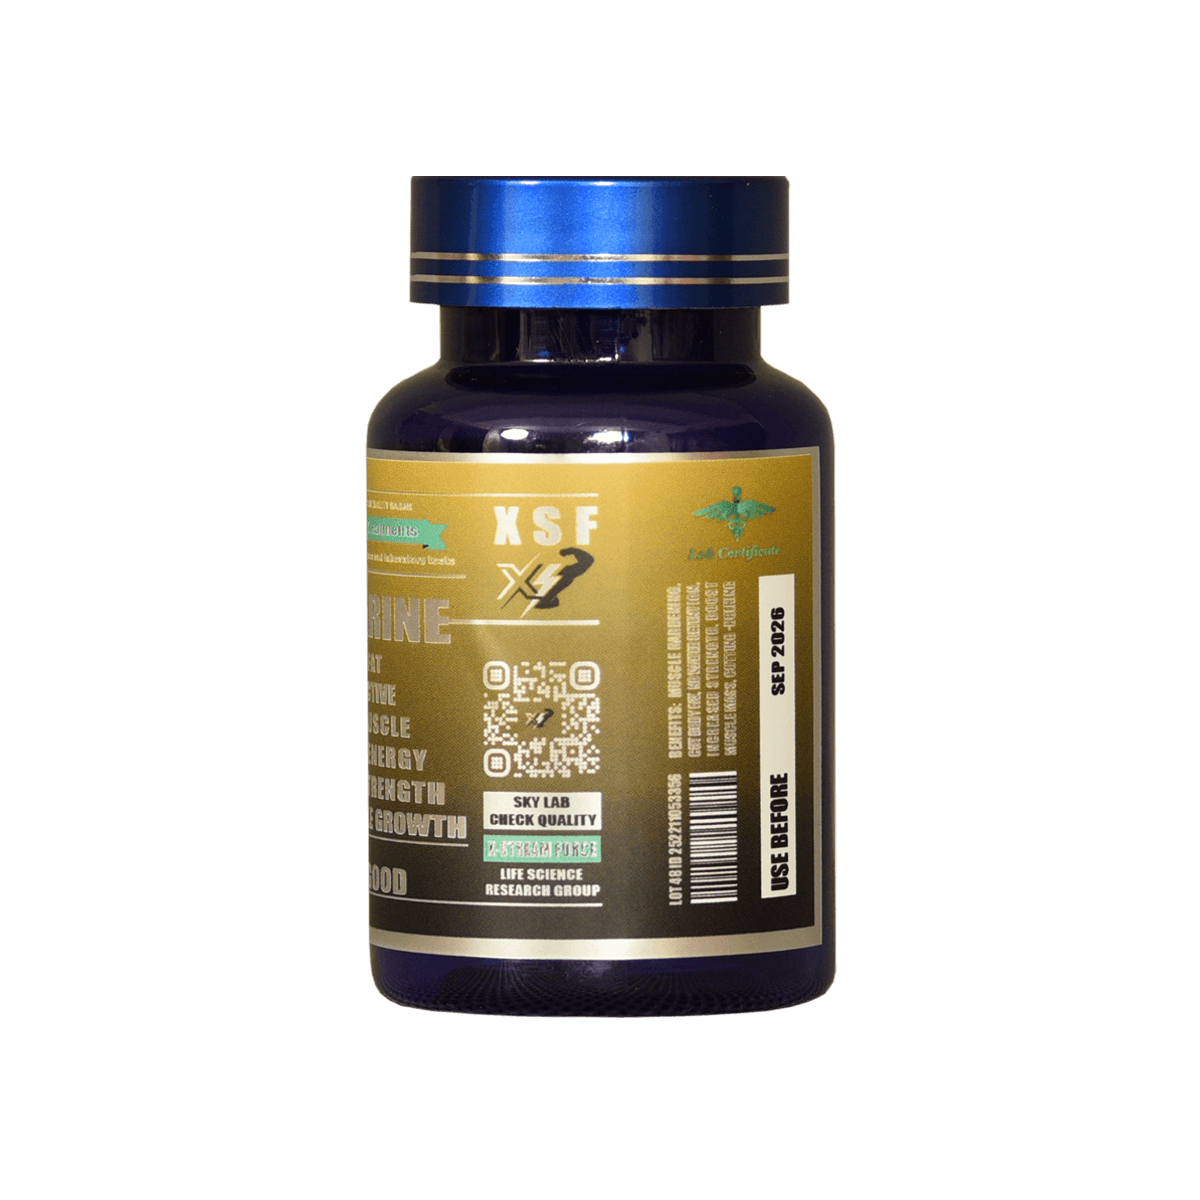 cardarine-gw155016-capsules-100-10mg-muscle shop-xstreamforce-for cardio-strength-fat cleaner-endurance-buy online✦gw501516sarms✦ fitness supplements XSF Store-muscle-hunter